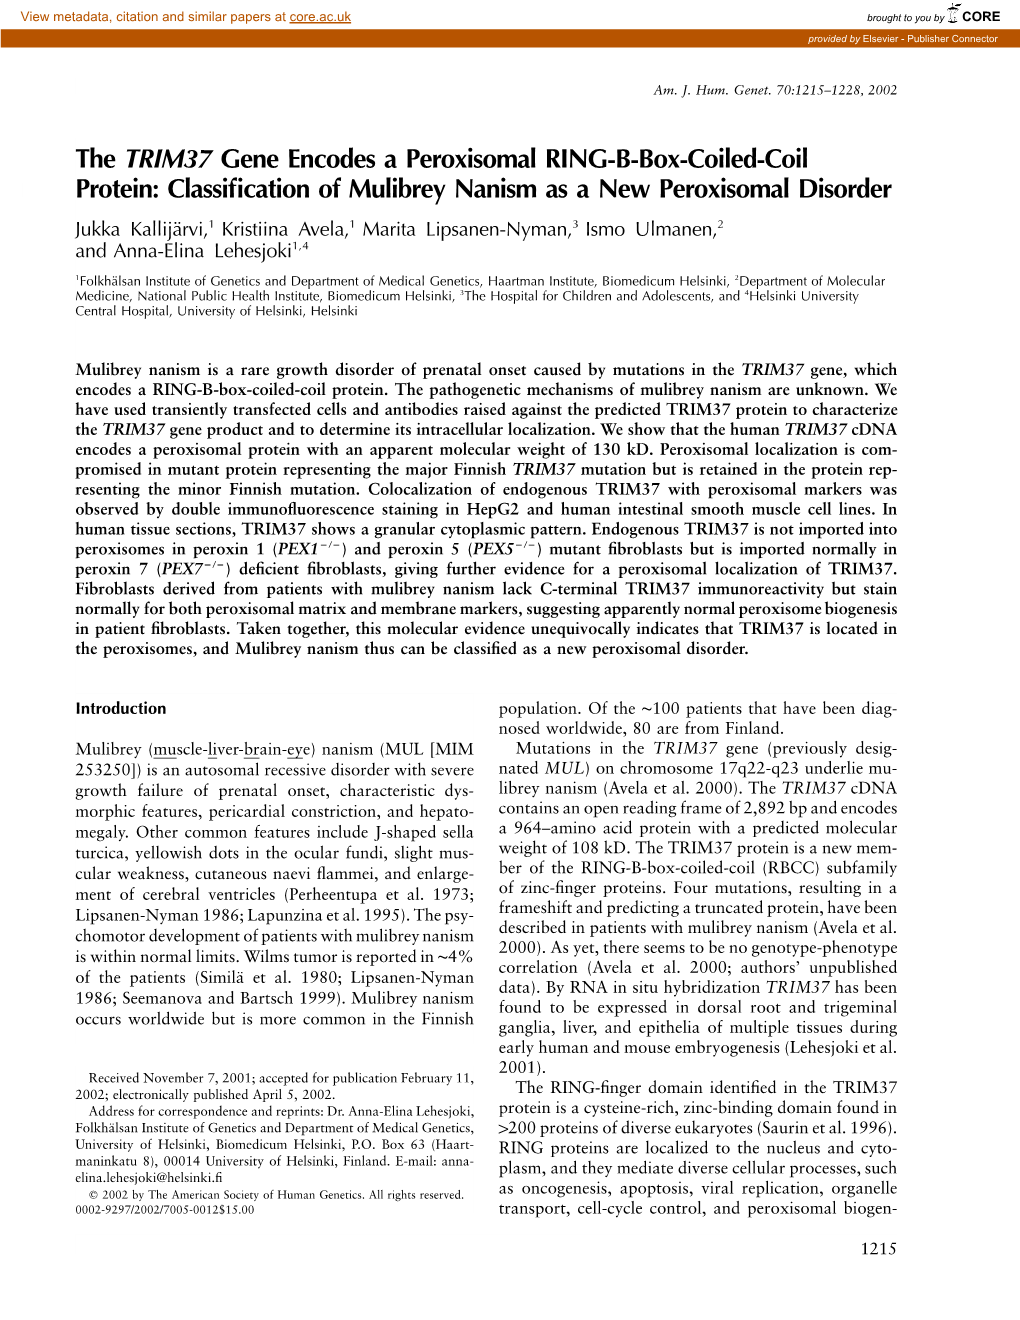 Classification of Mulibrey Nanism As a New Peroxisomal